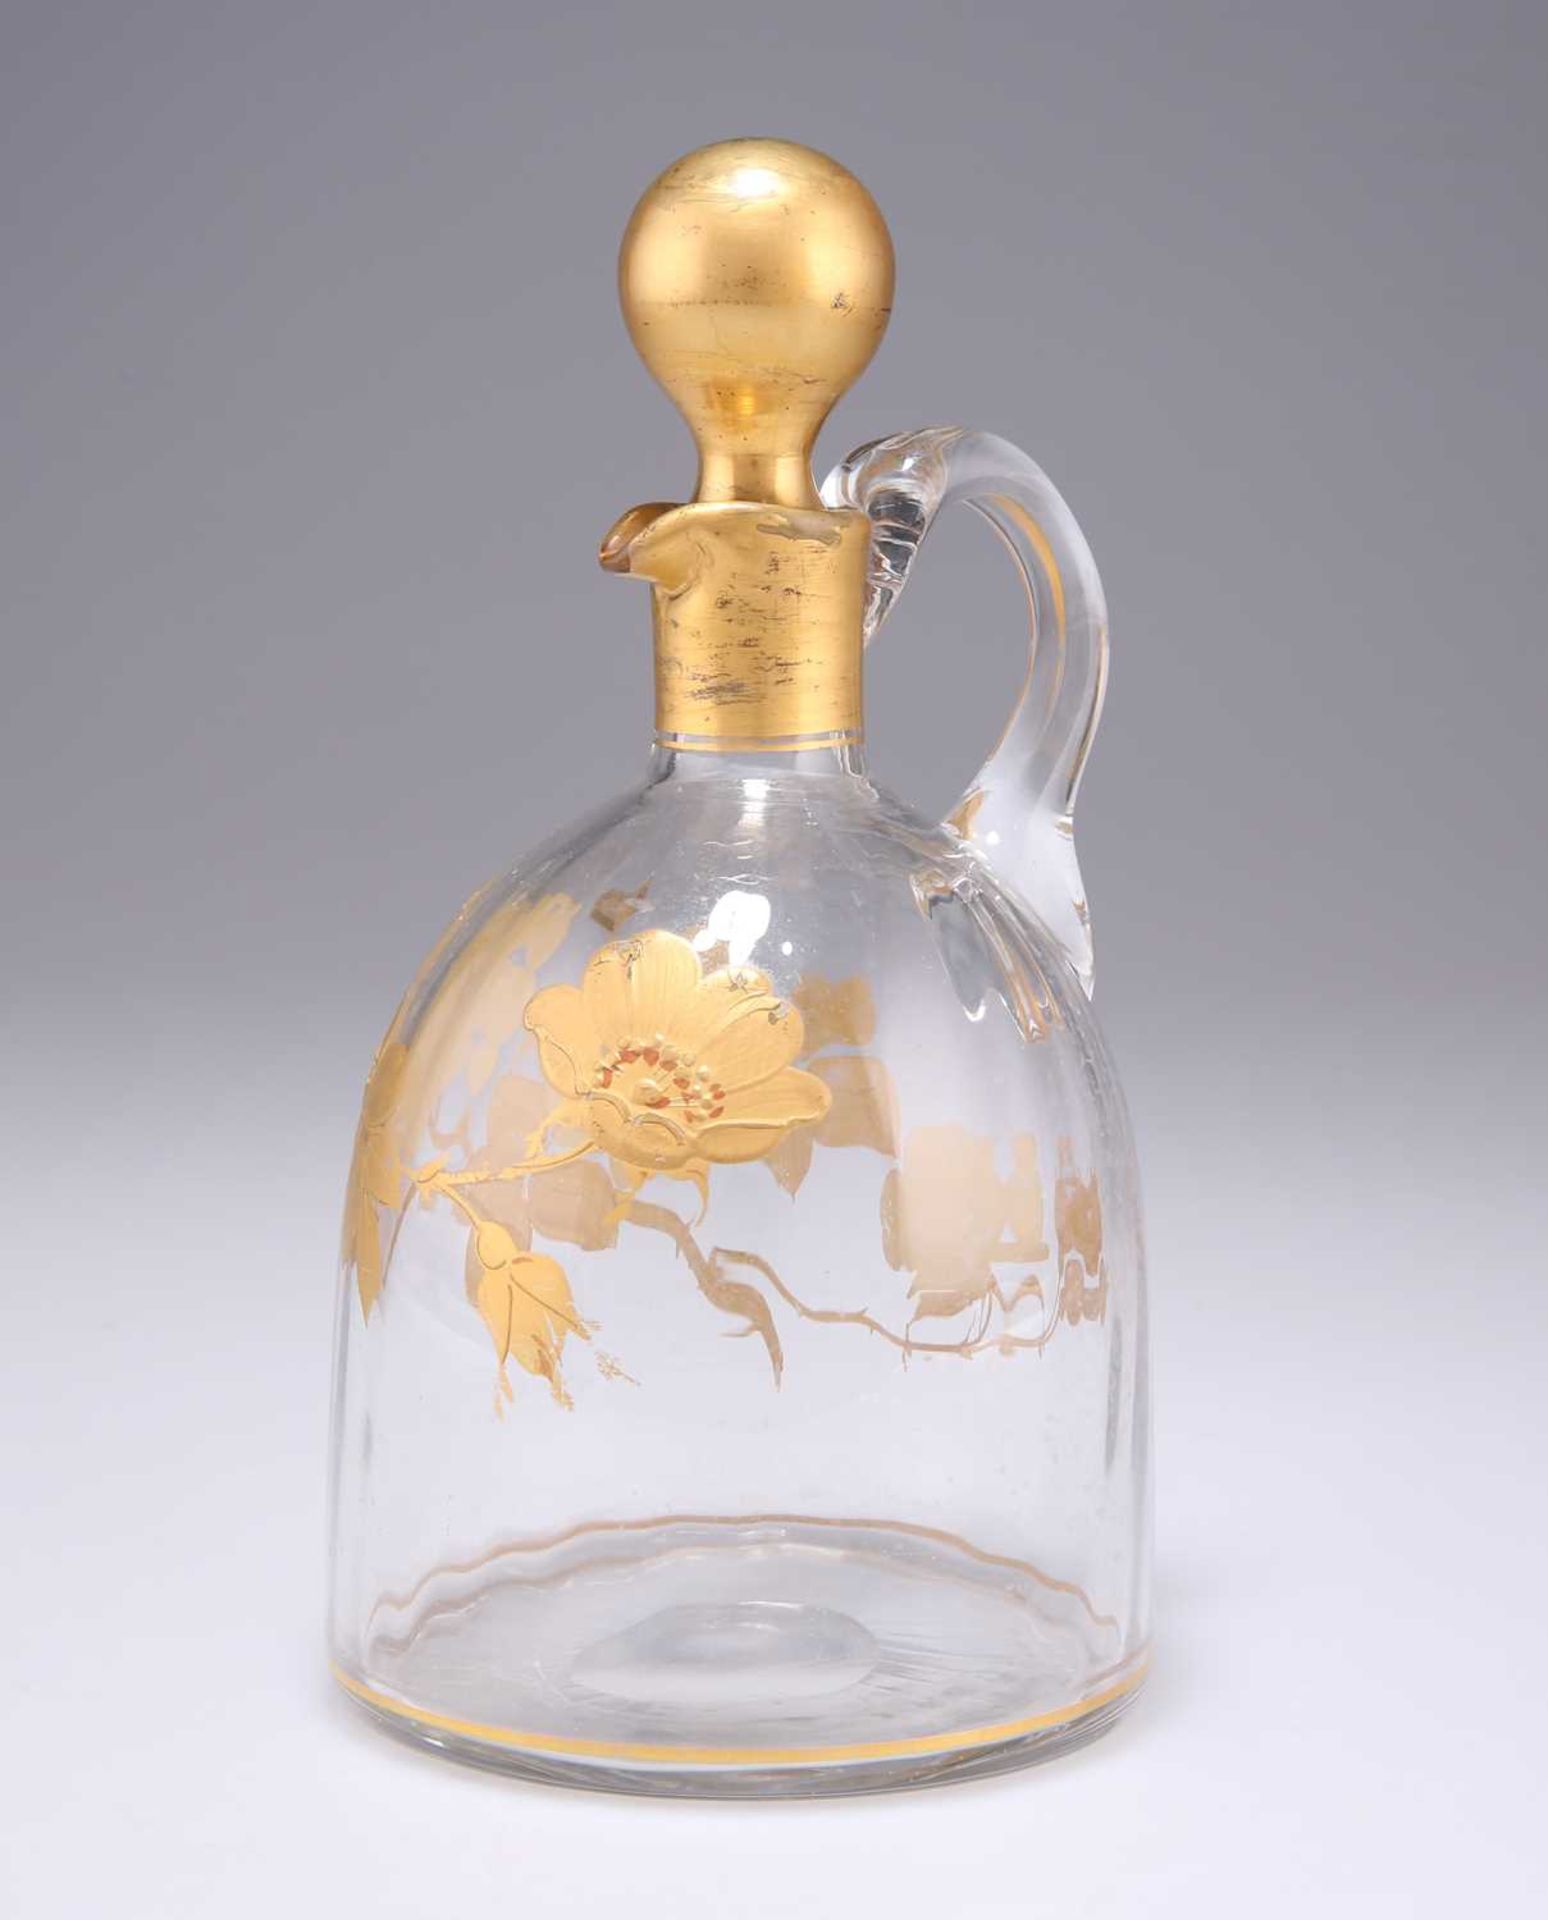 A LATE 19TH/EARLY 20TH CENTURY GILT GLASS DECANTER, POSSIBLY BACCARAT - Image 2 of 2